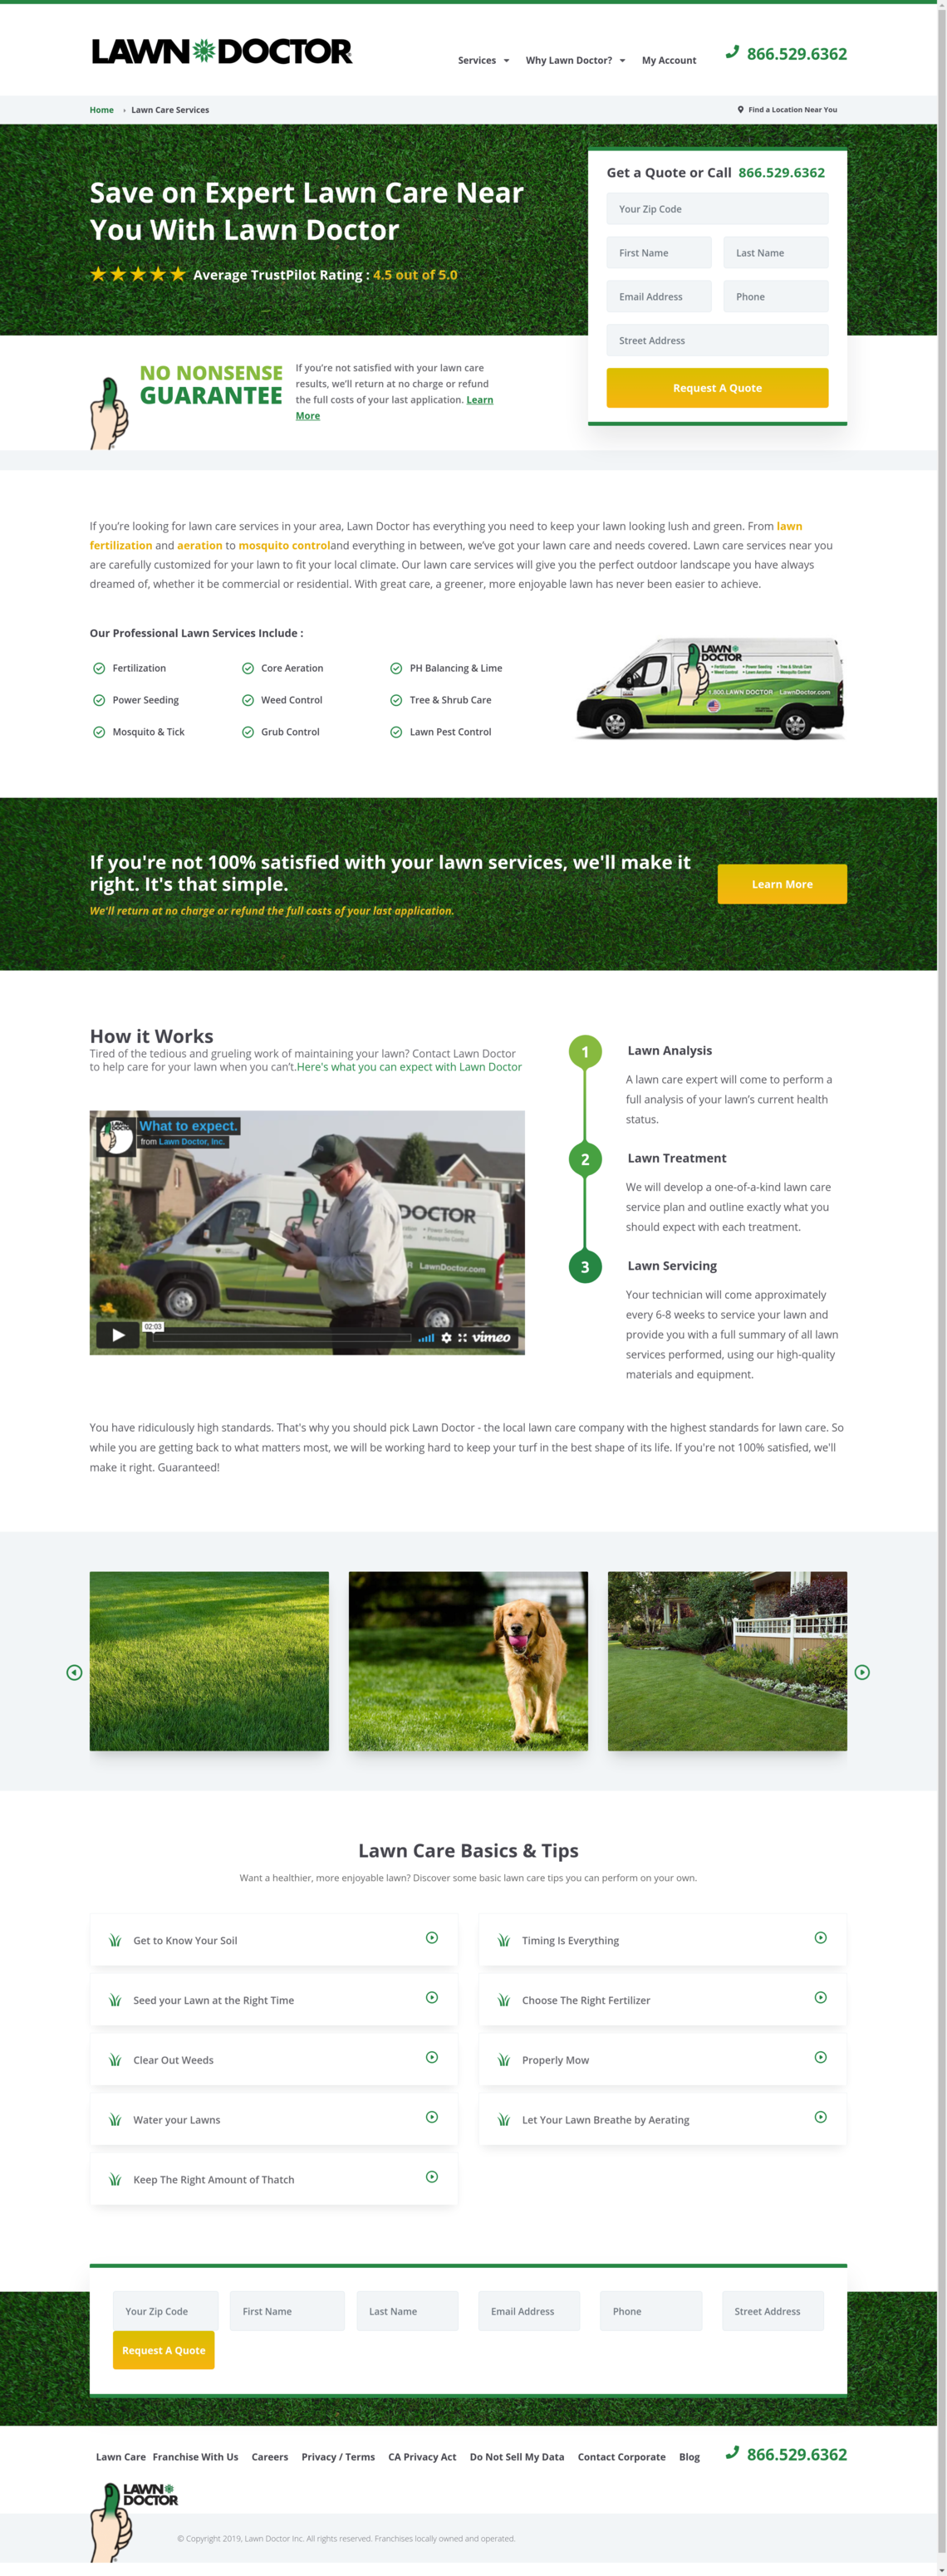 Landing Page Template for Lawn Care - lawndoctor.com_lawn-care